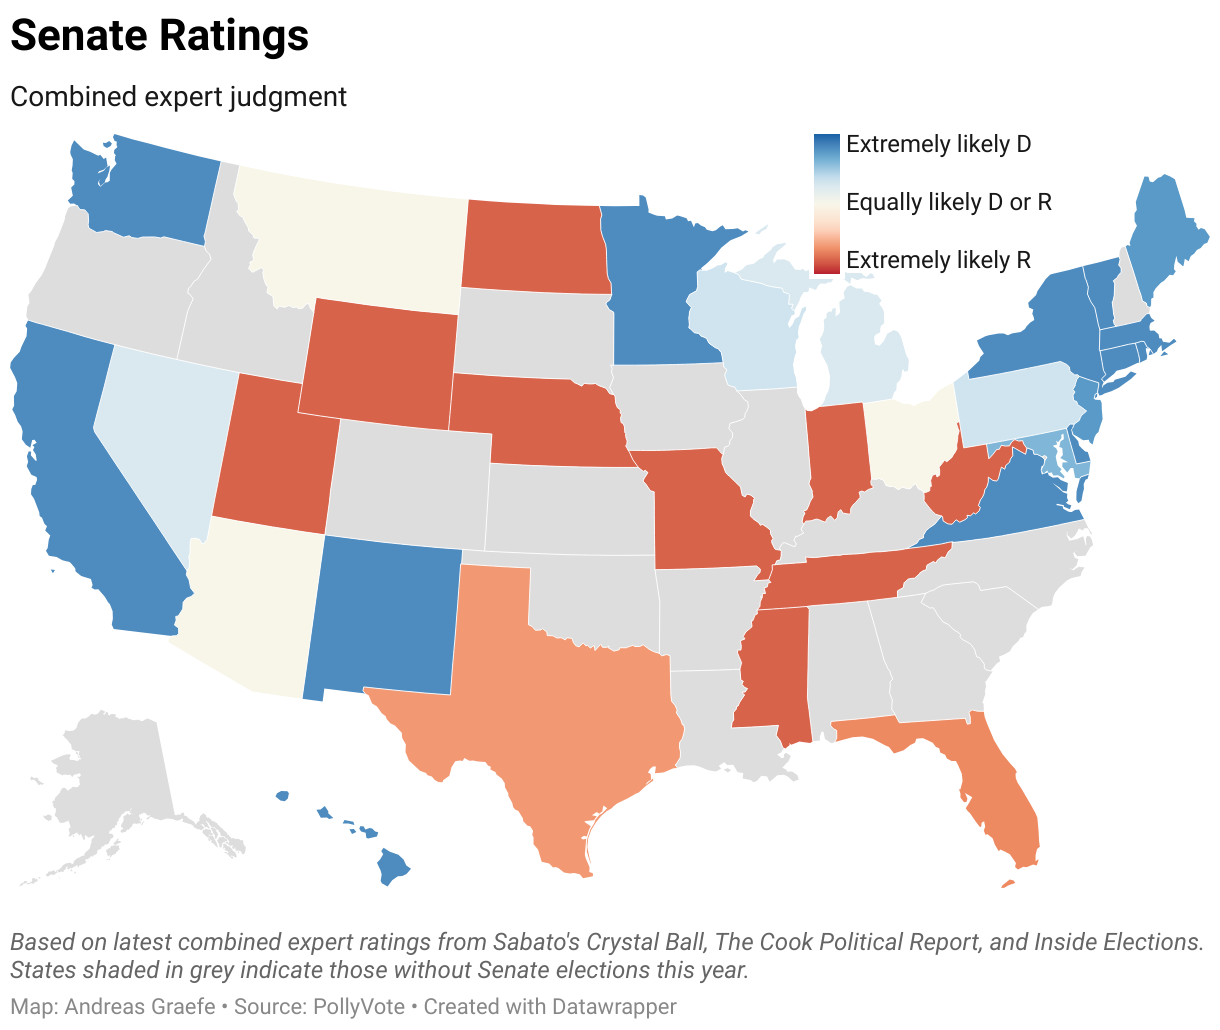 Map based on latest combined expert ratings from Sabato's Crystal Ball, The Cook Political Report, and Inside Elections.